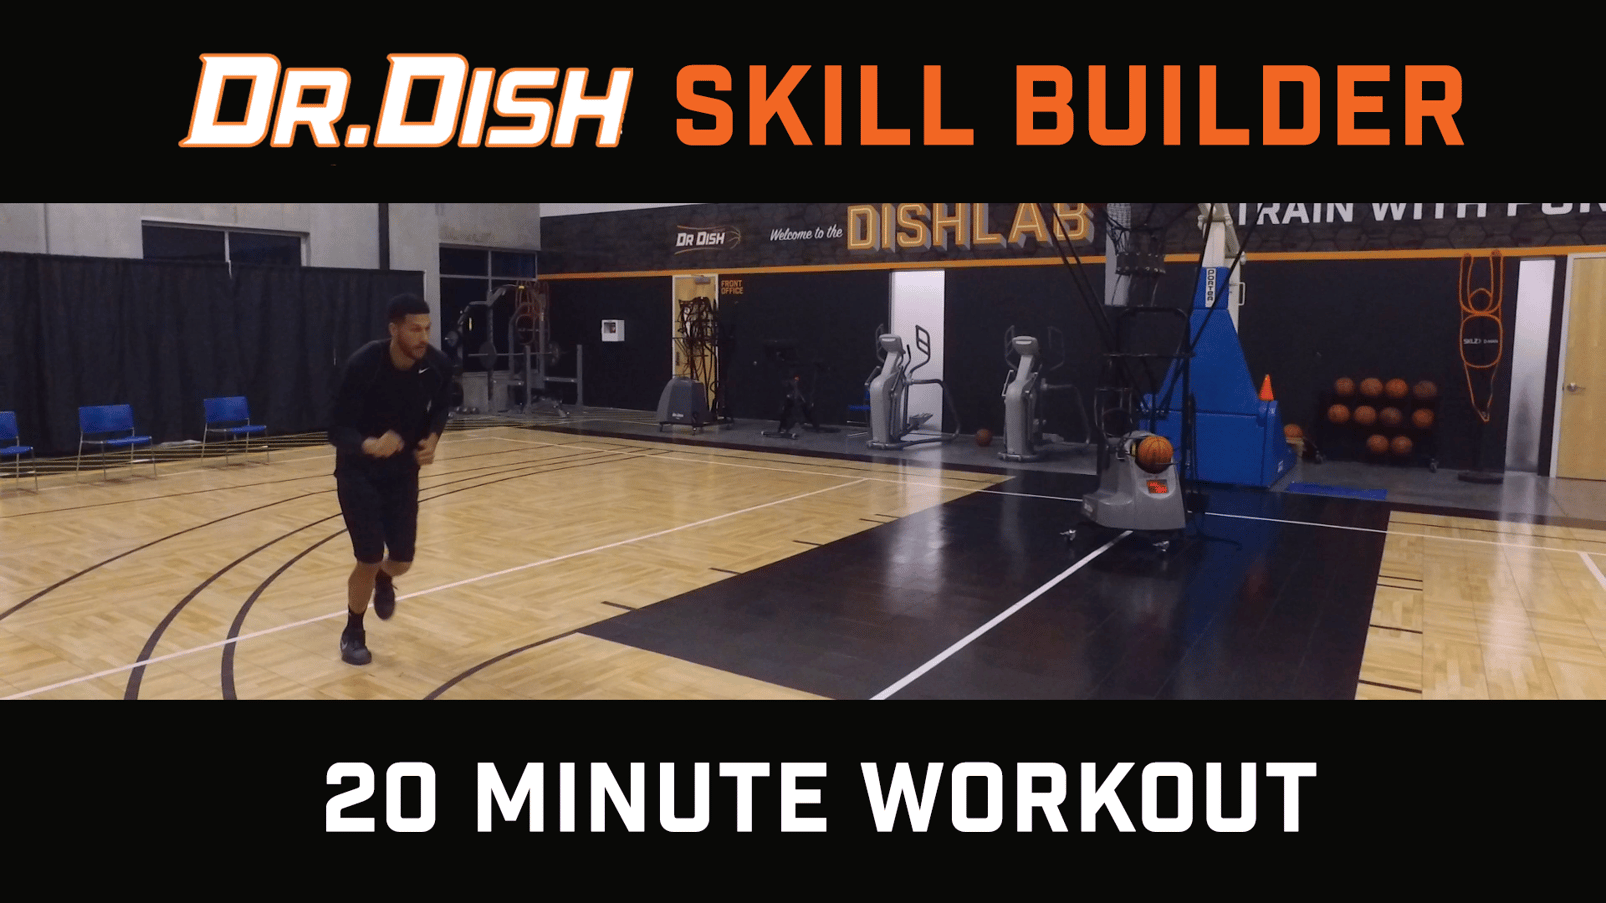 5 Day Basketball shooting workout for push your ABS